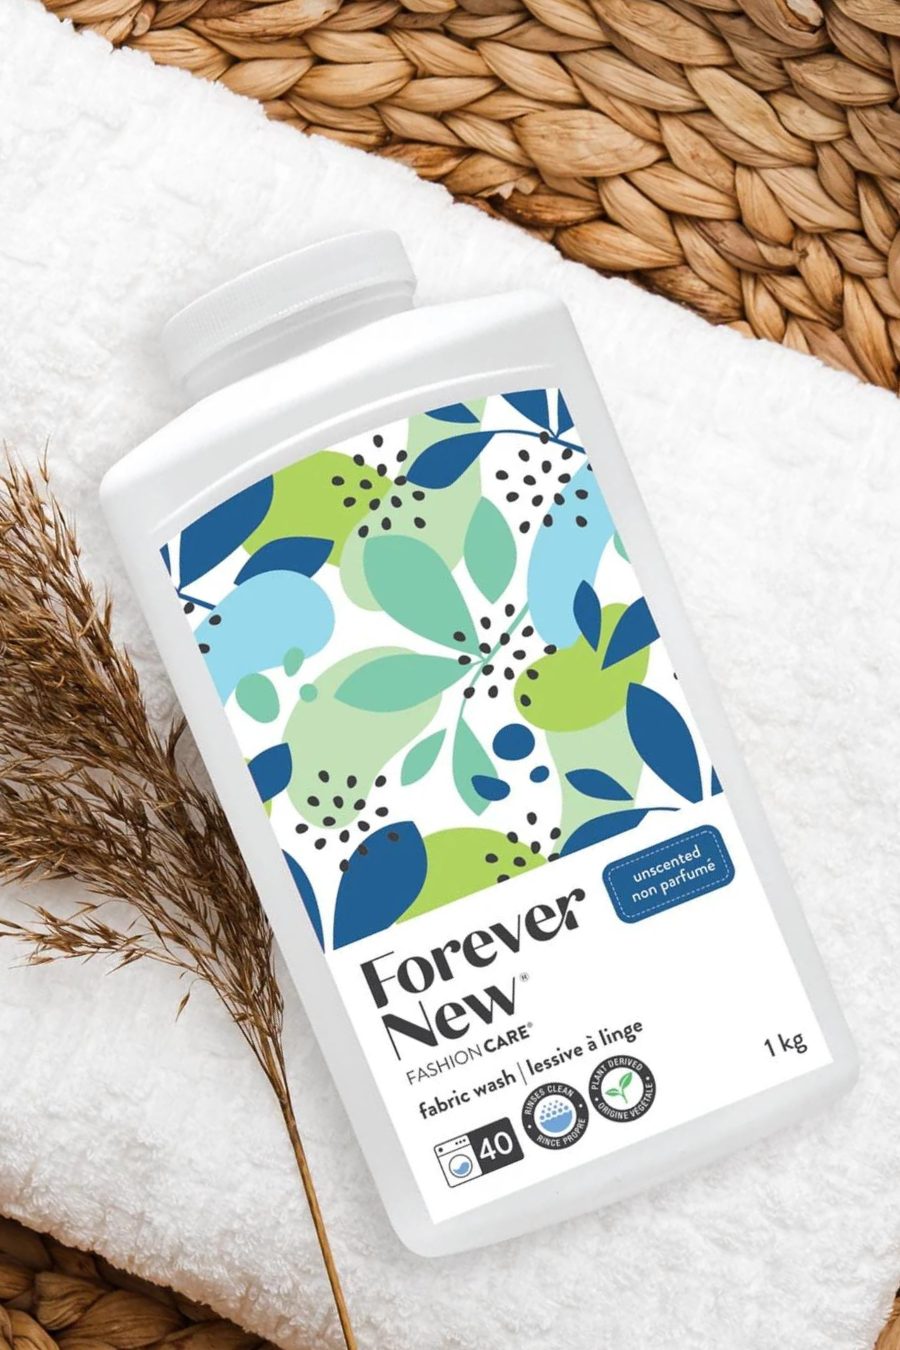 Swirl® Lingerie Wash – Forever New Fashion Care